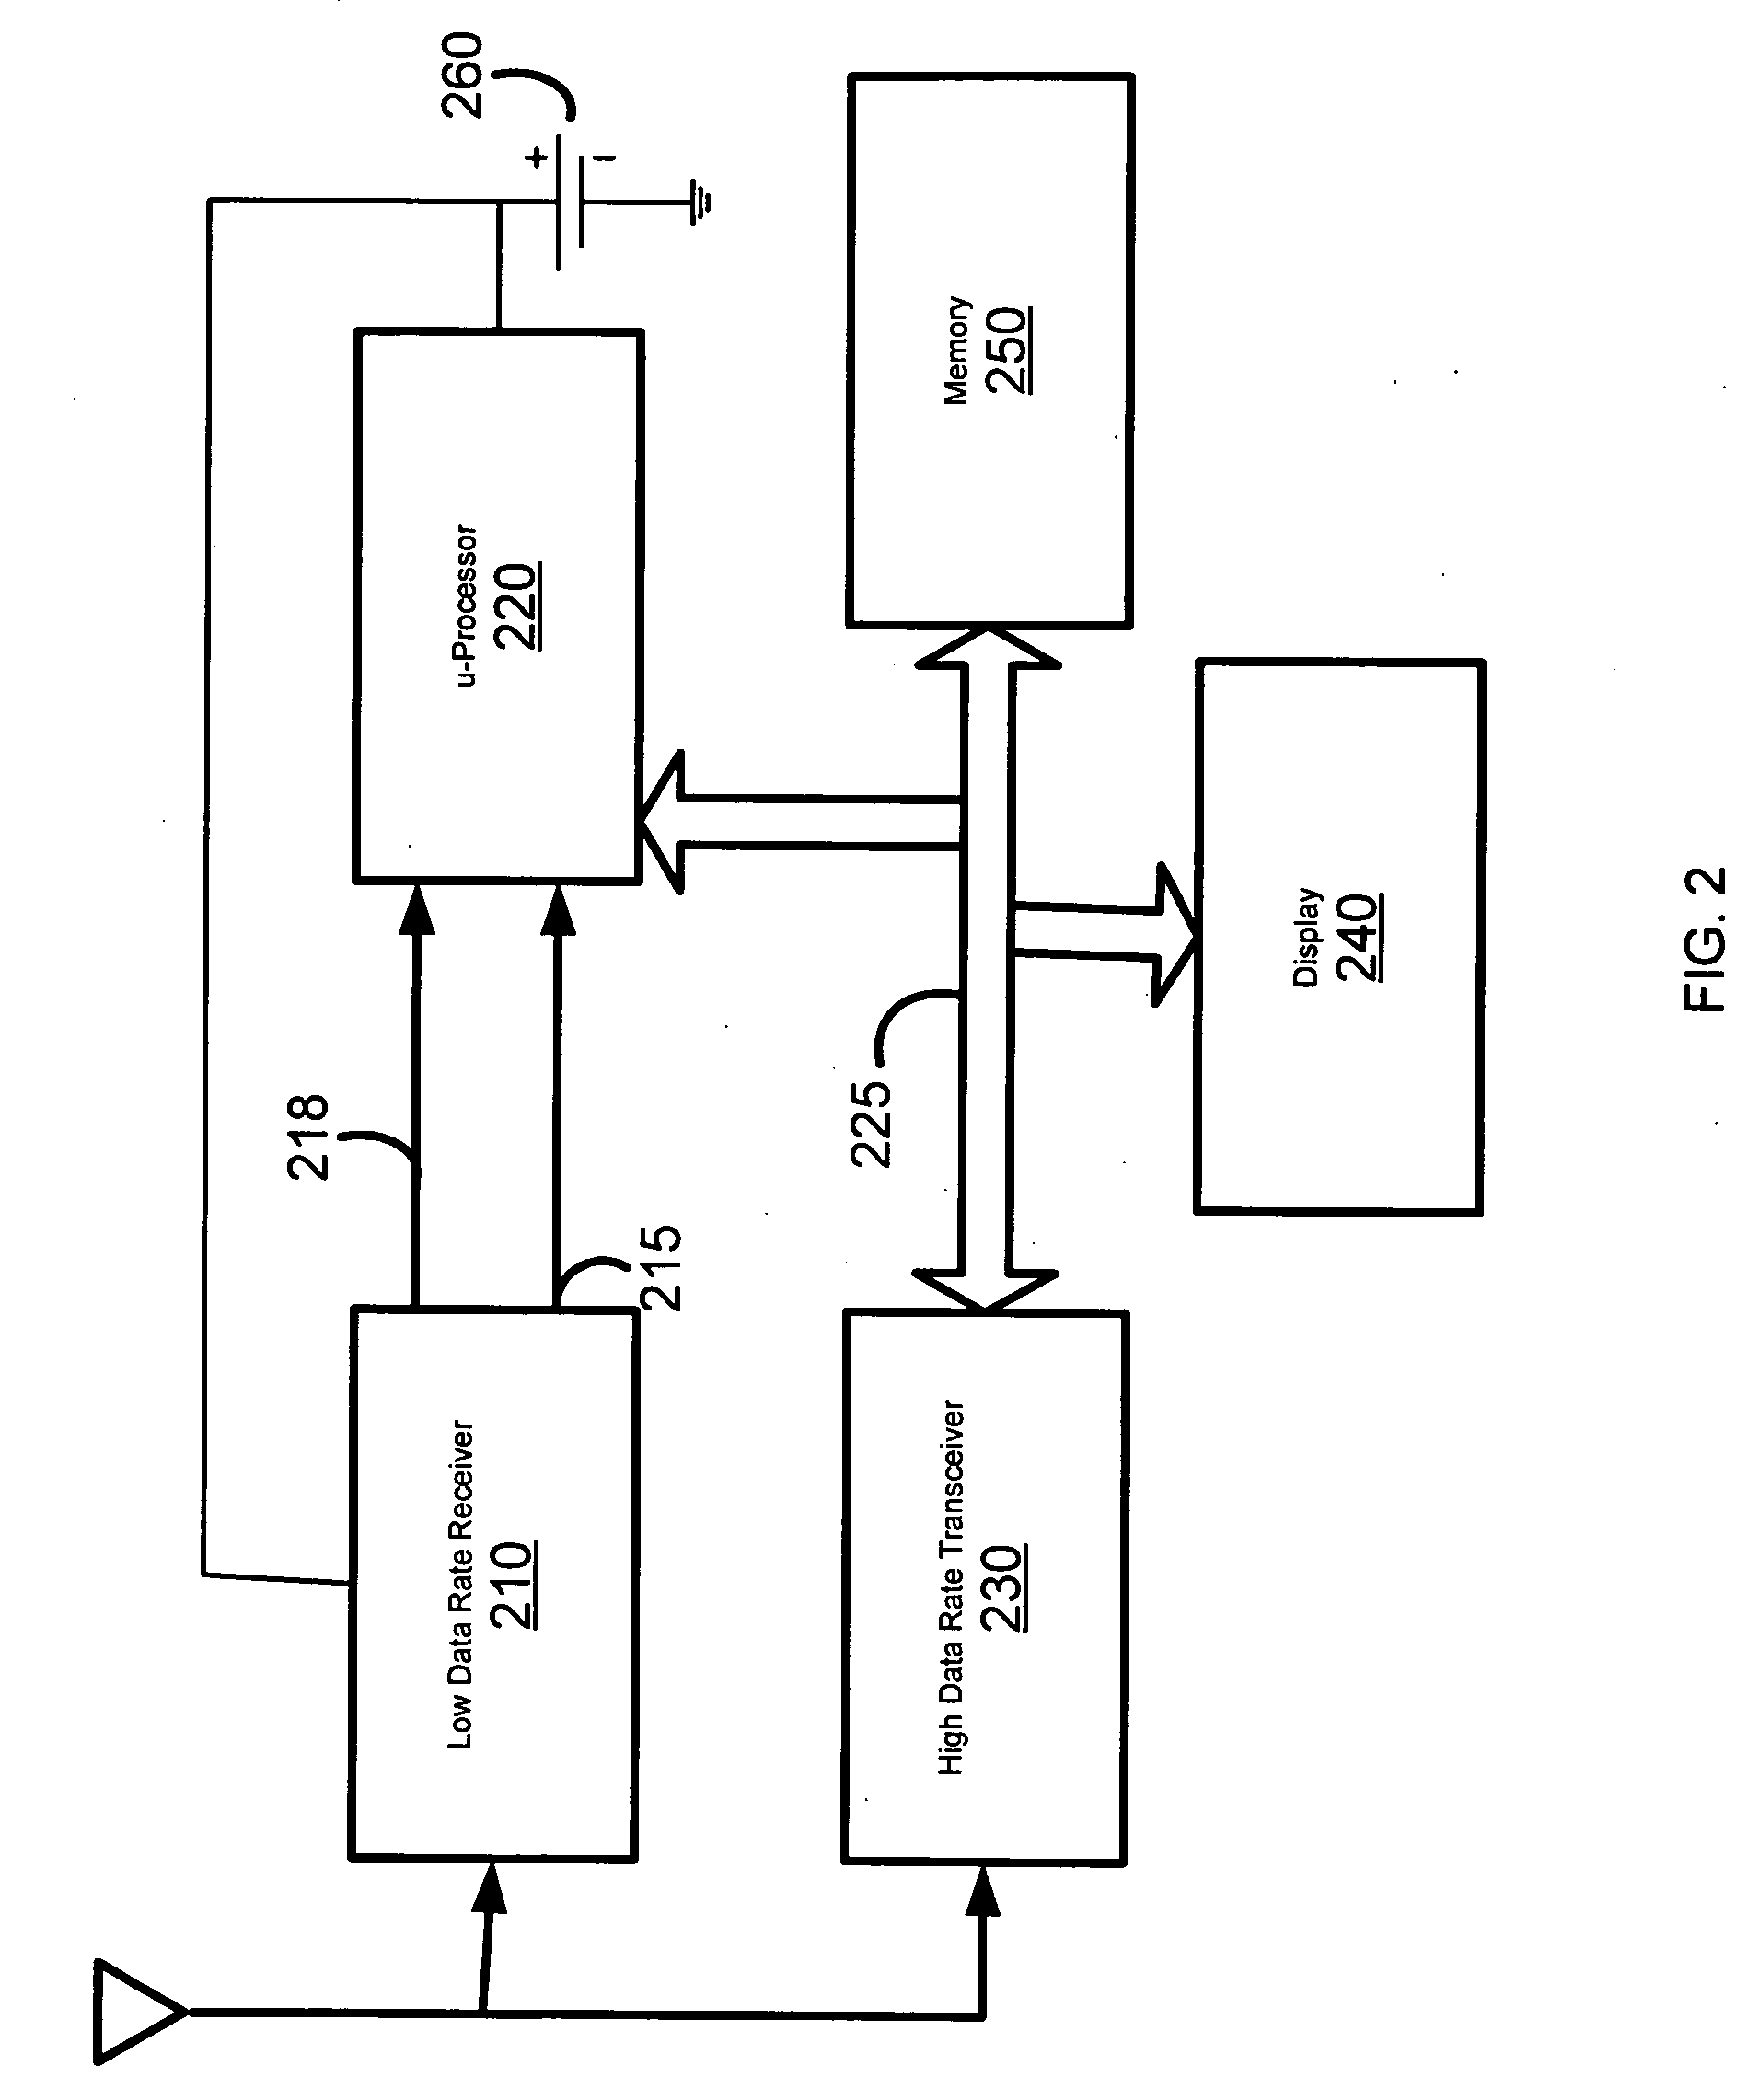 Apparatus and methods for communicating with a low duty cycle wireless device